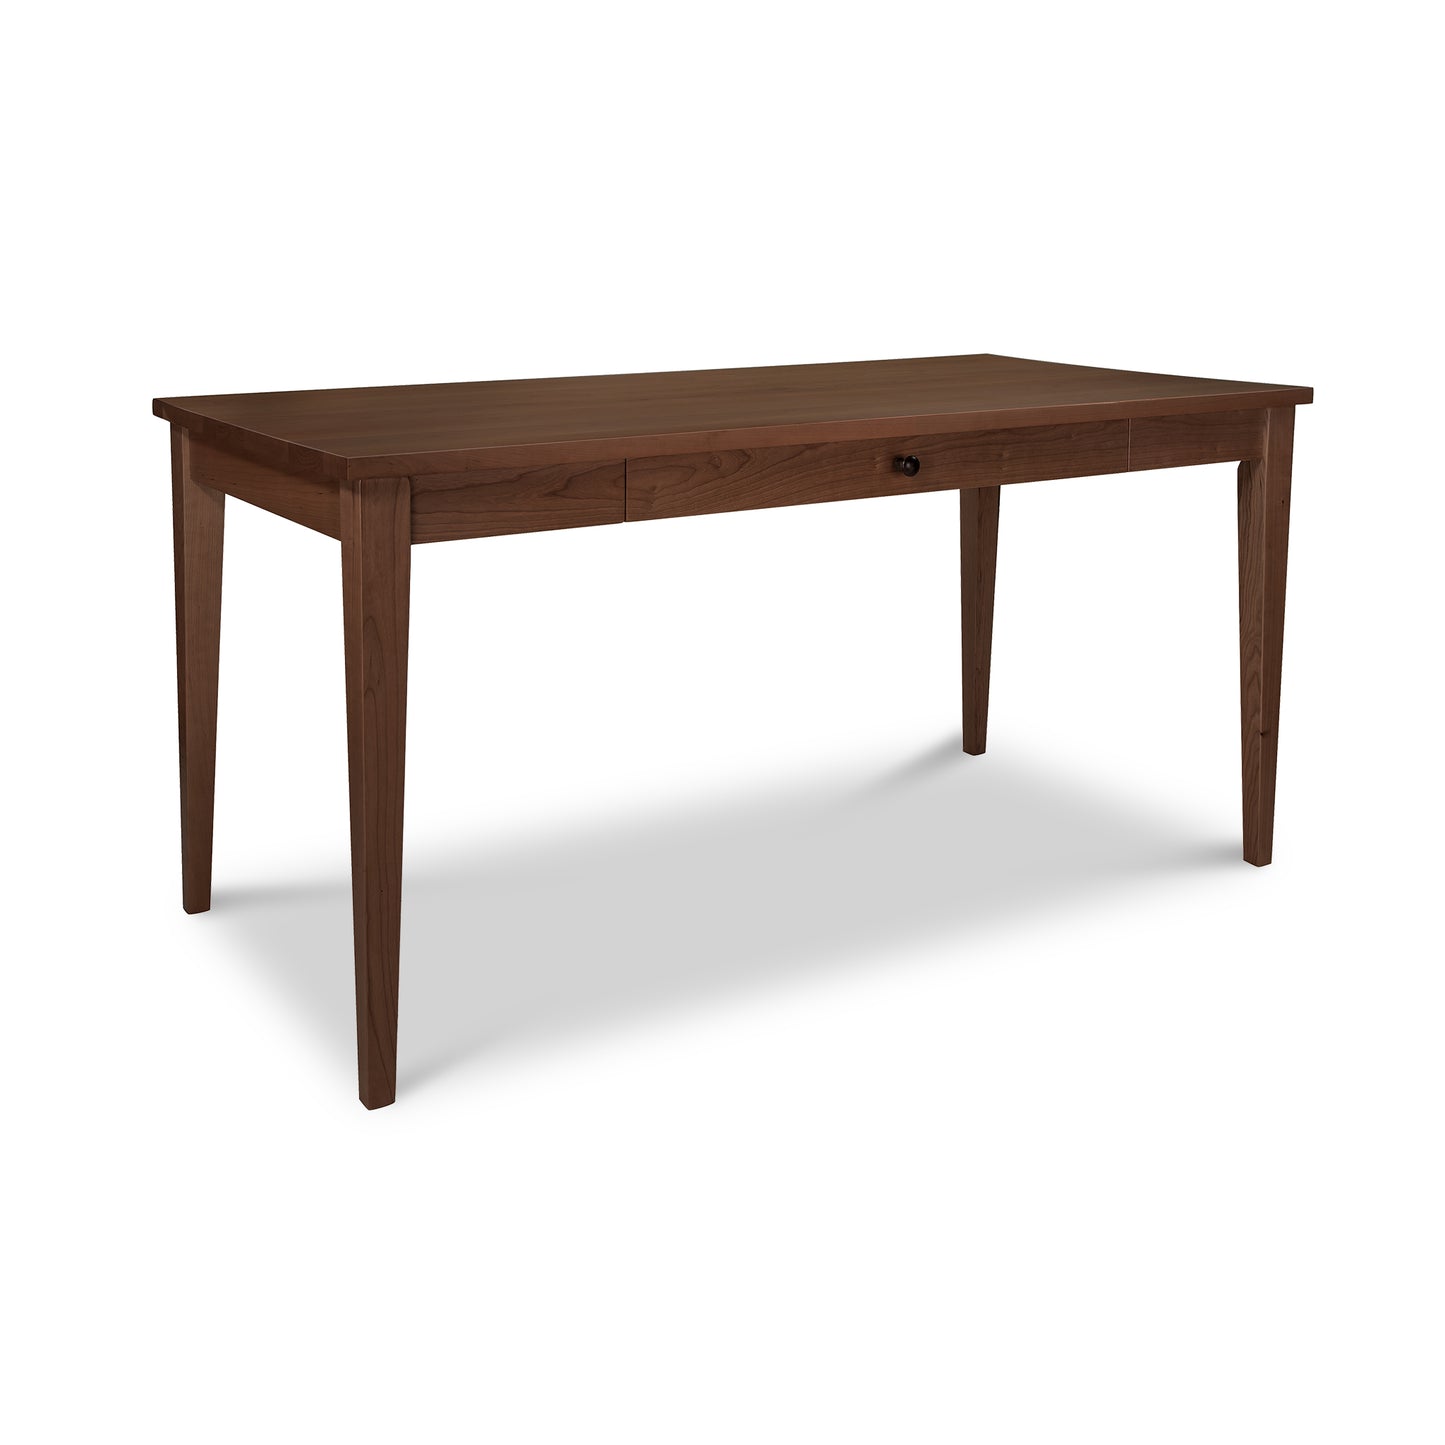 A eco-friendly Lyndon Furniture Classic Shaker Writing Desk with a natural solid wood top and legs.